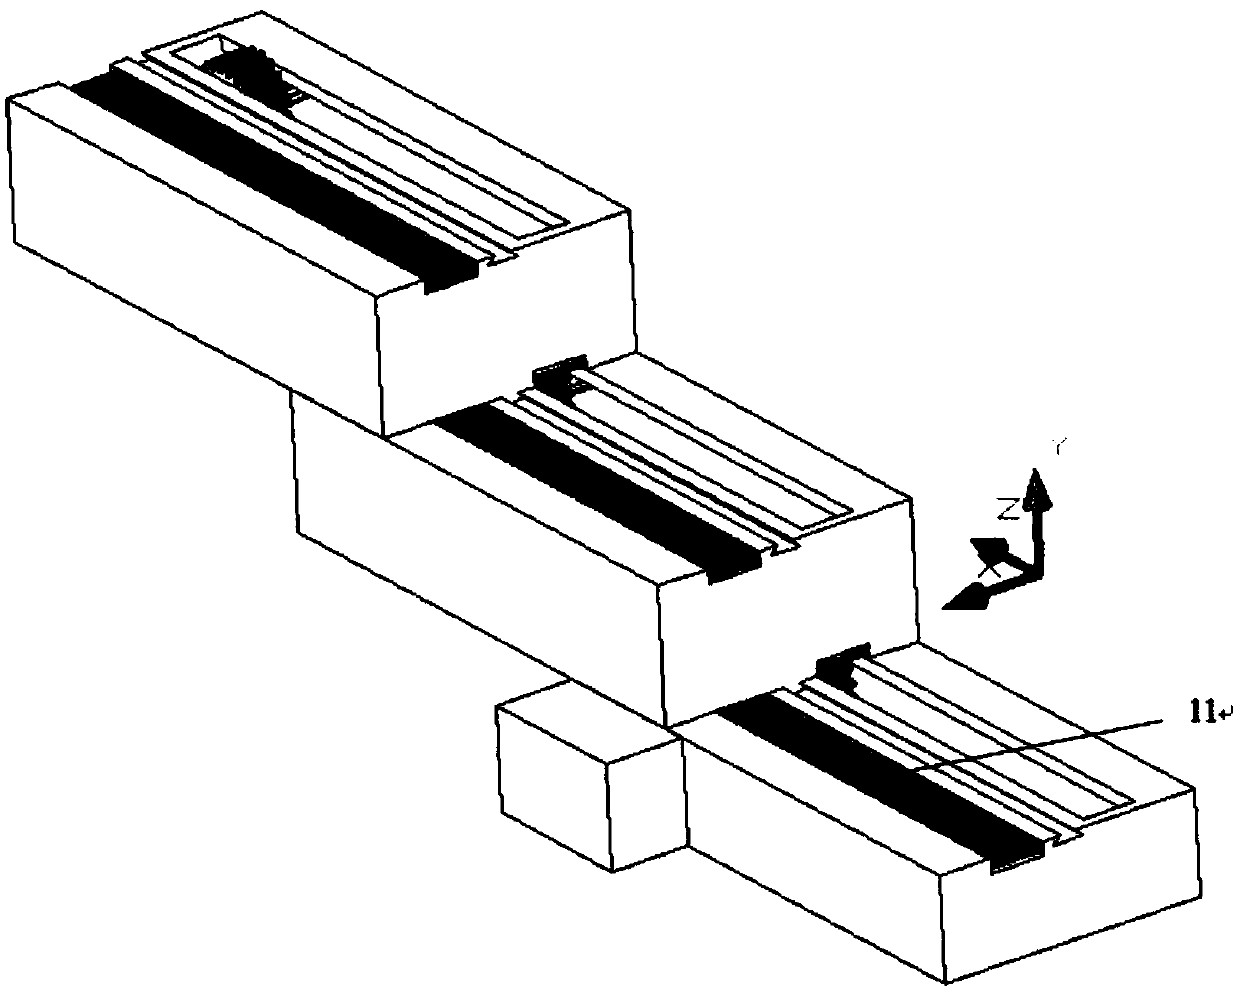 A linear linkage expansion device